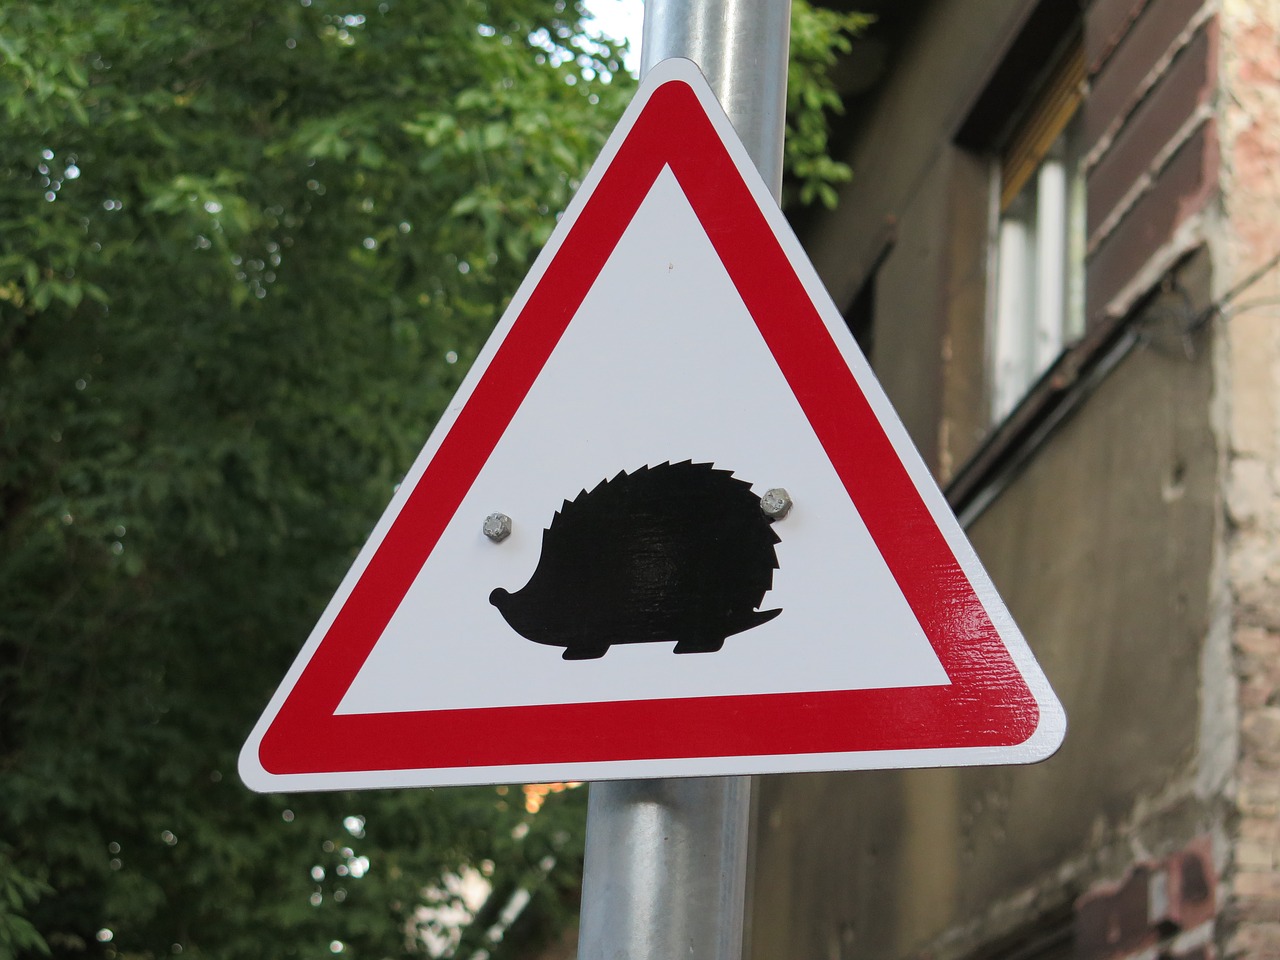 hedgehogs  hazard  rules of the road free photo